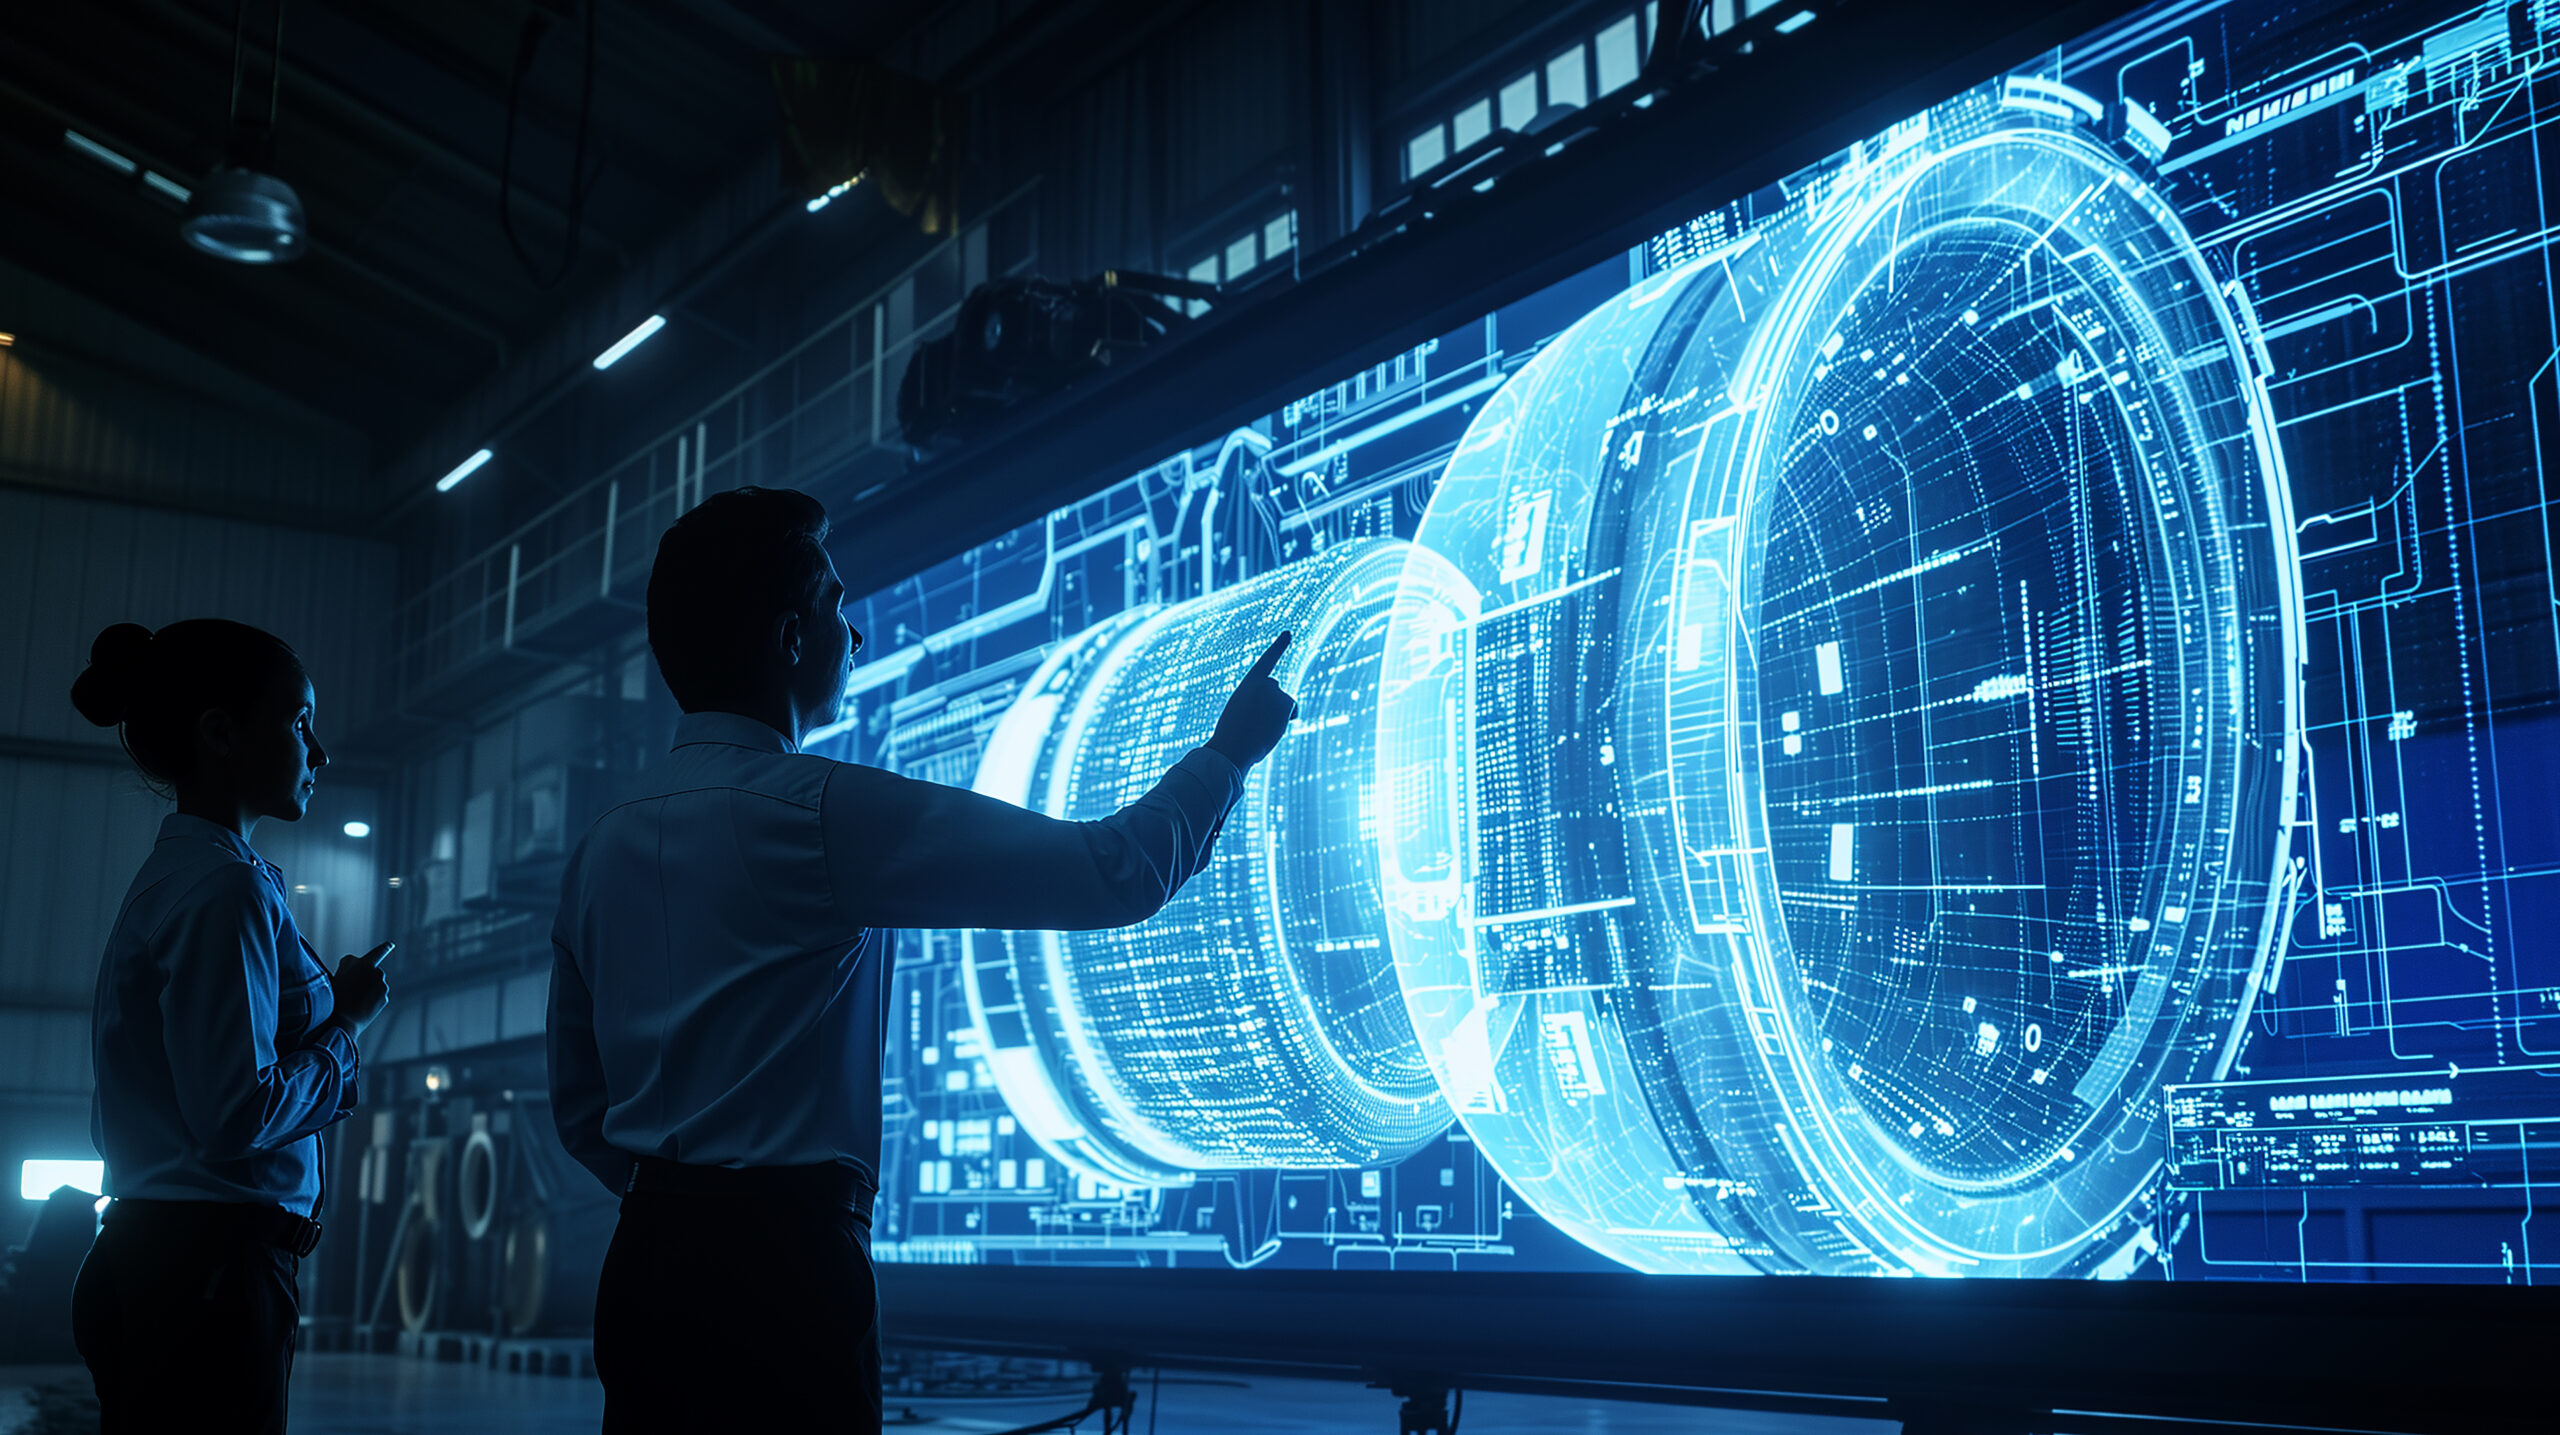 At the spacecraft factory engineers analyze digital projection of satellite's blueprint